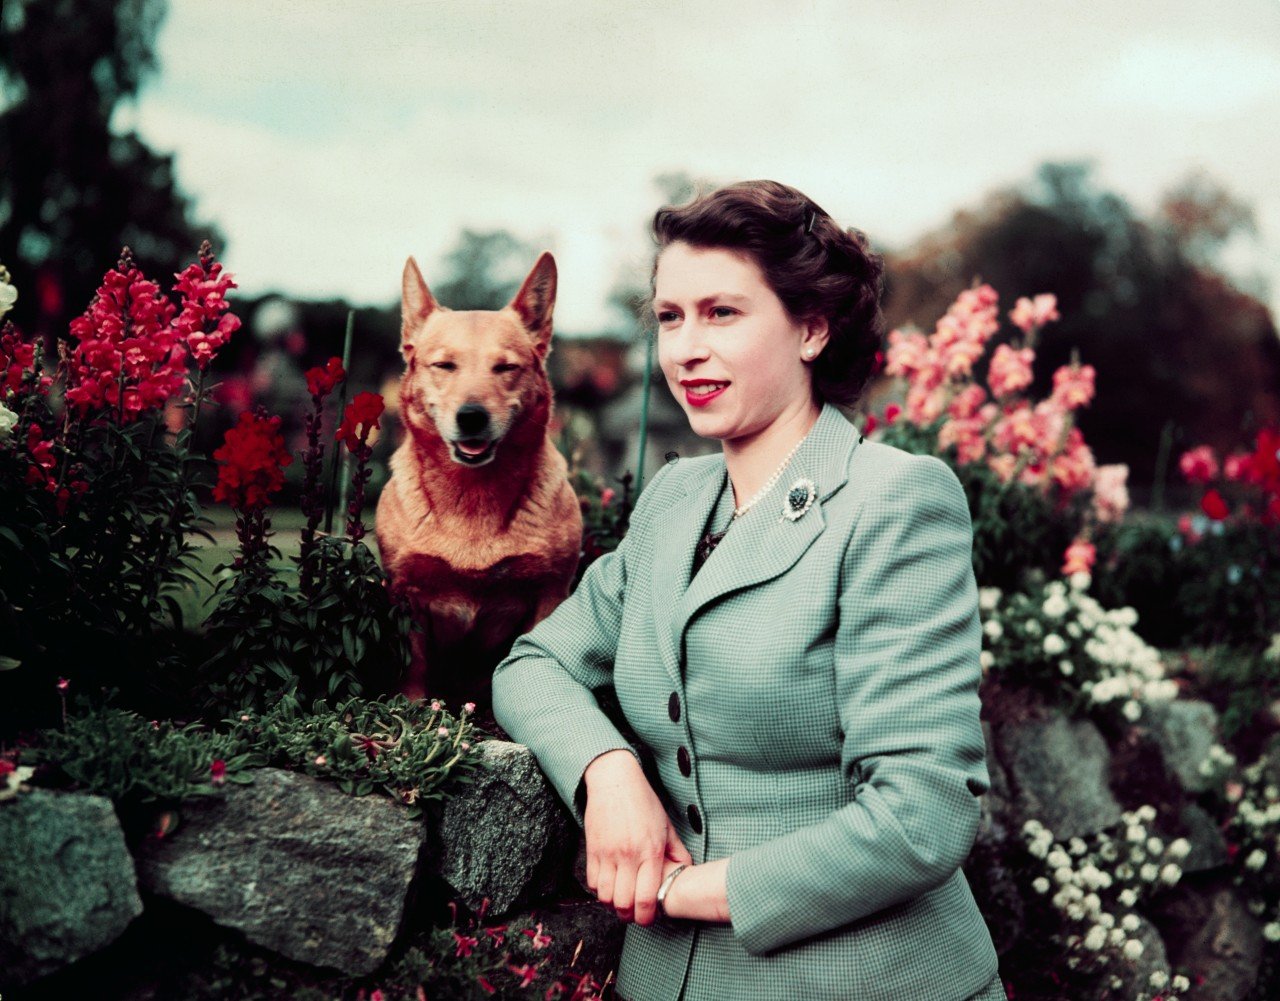 Queen Elizabeth II poses with her dog when she was younger.